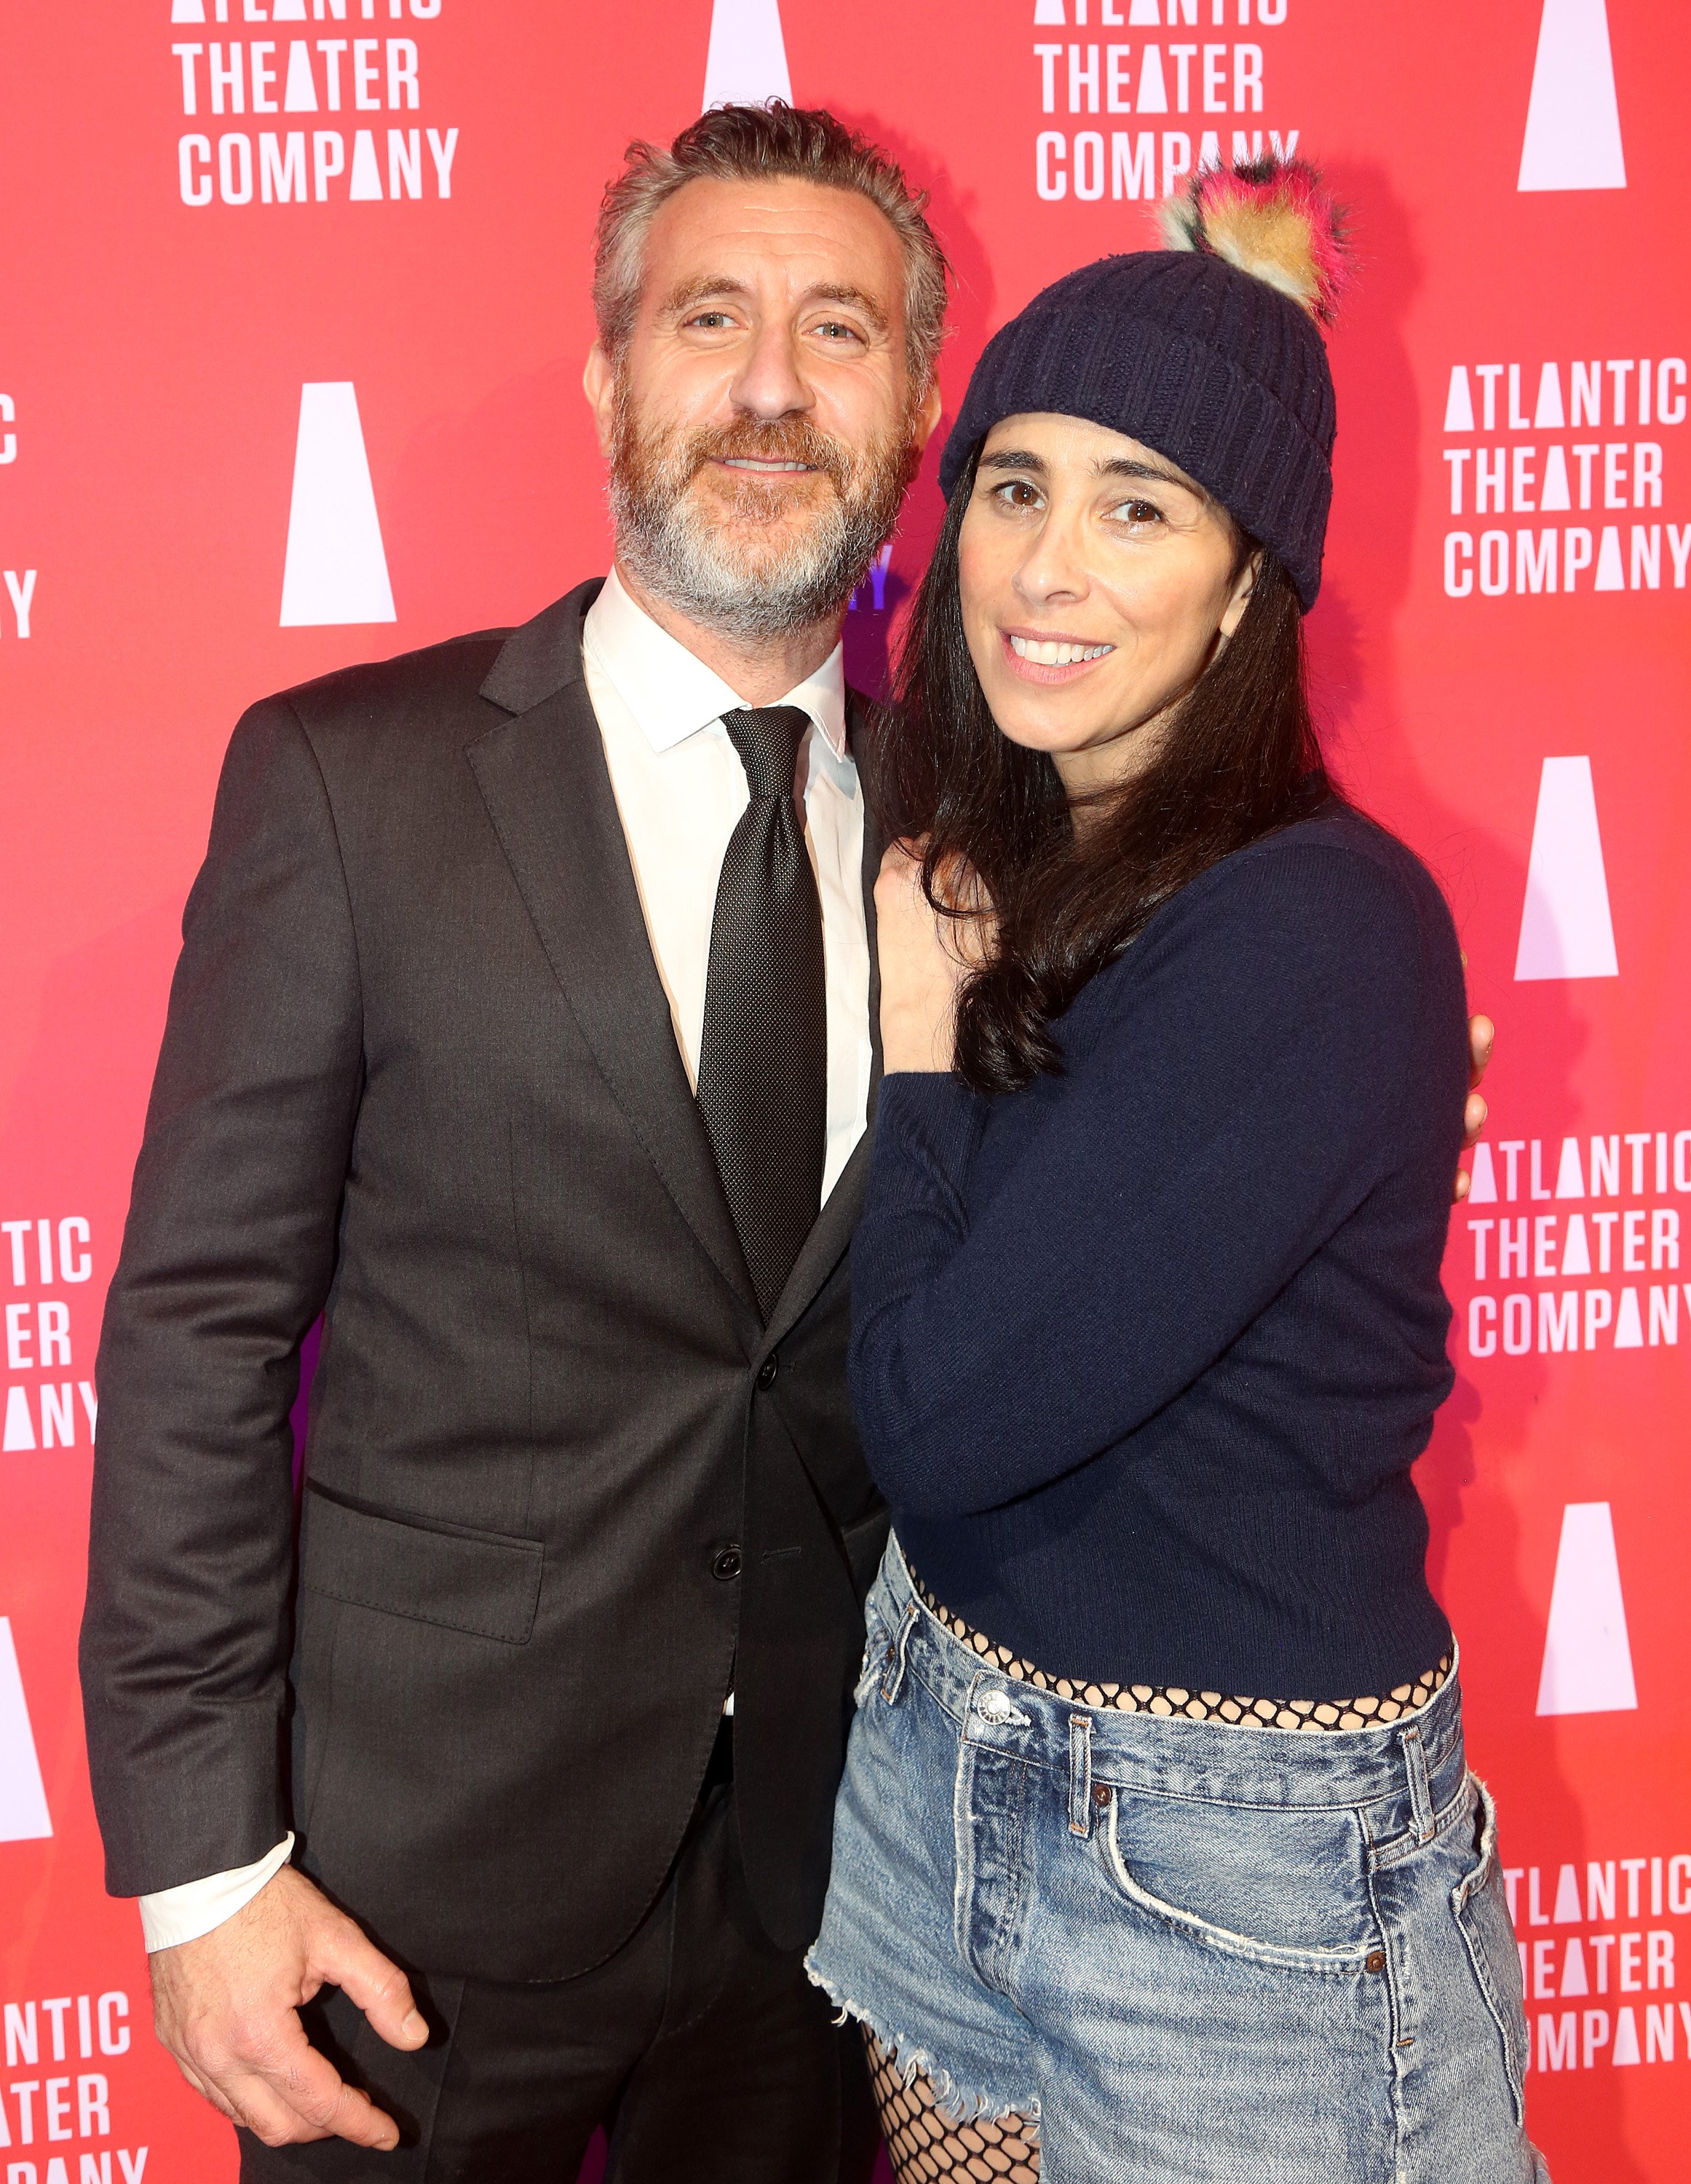 May 23, 2022, at the Atlantic Theater Theater in New York, Rory Albaney and Sara Silverman . source: Getty Images